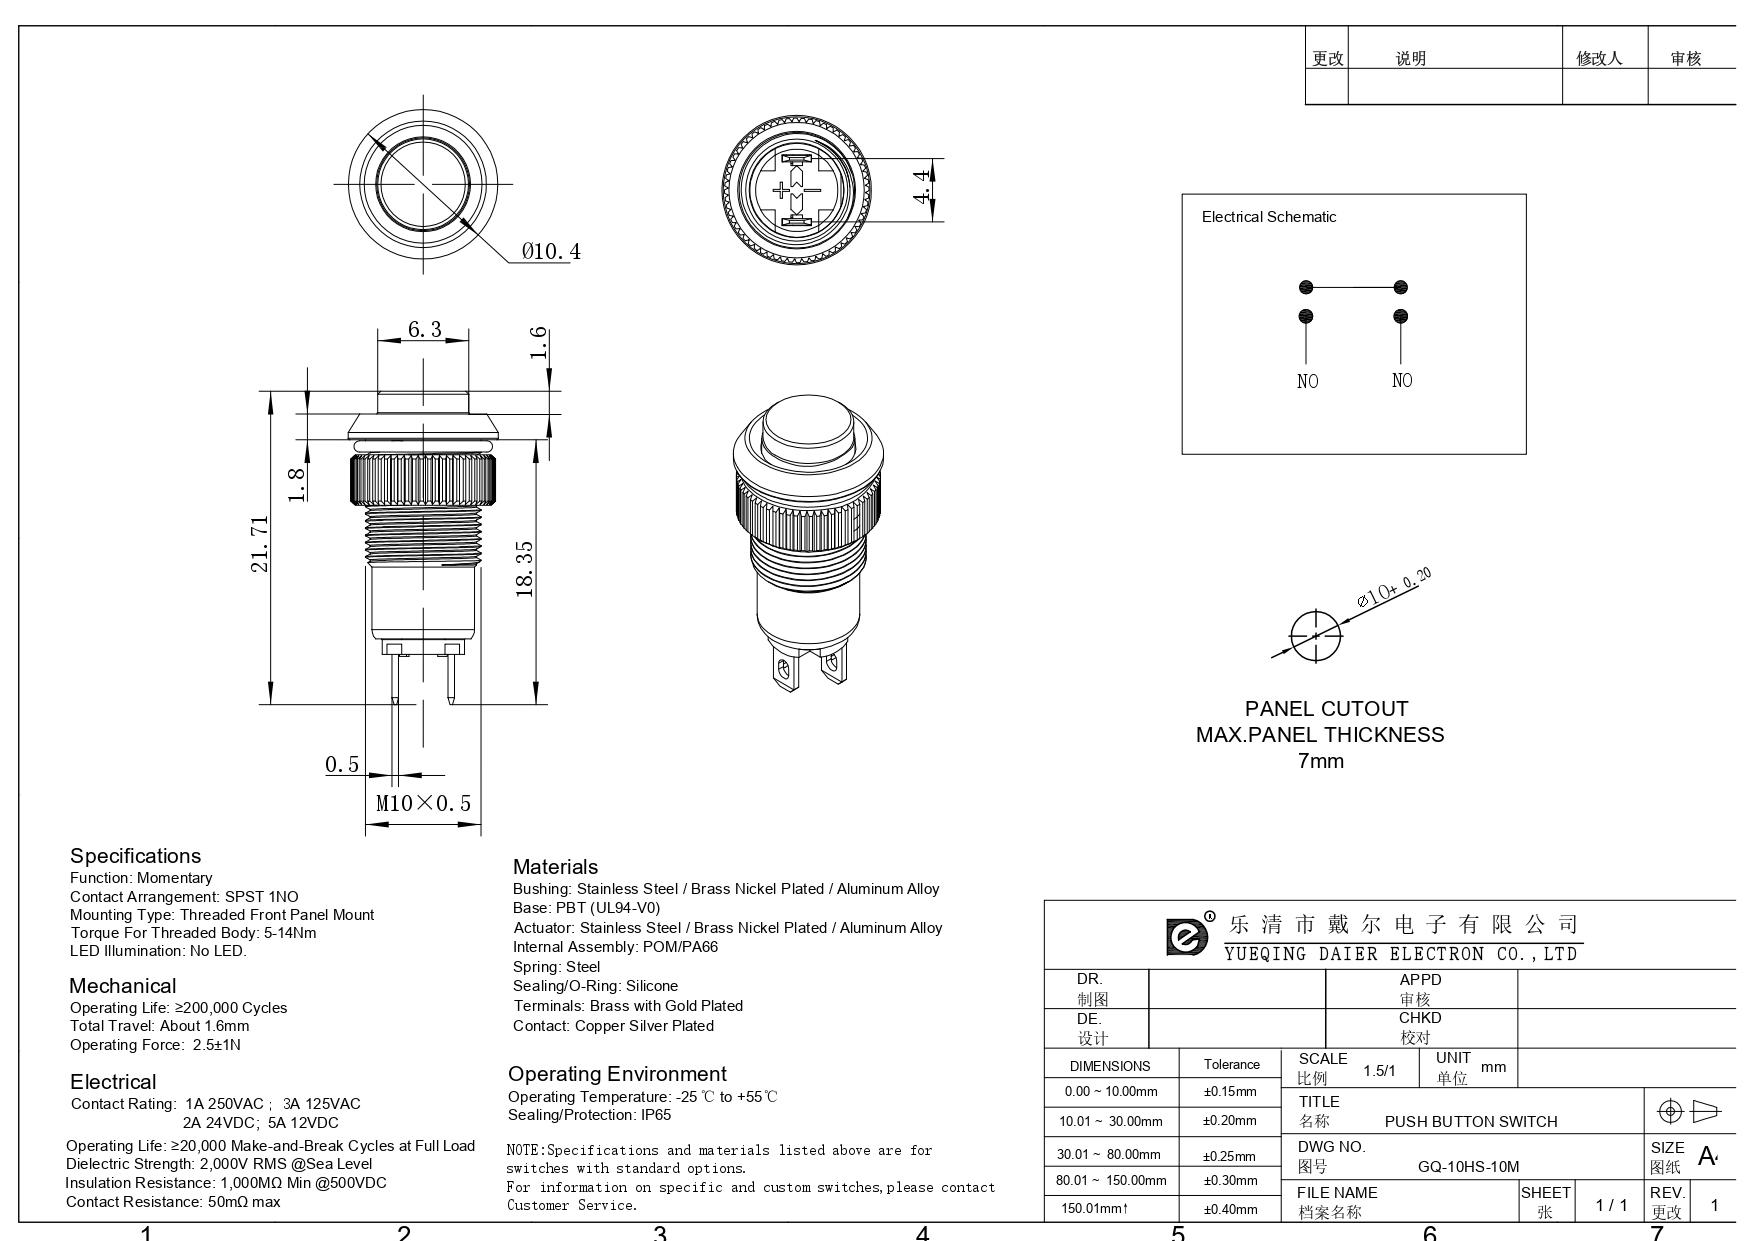 GQ-10HS-10M Dimensioned Drawing